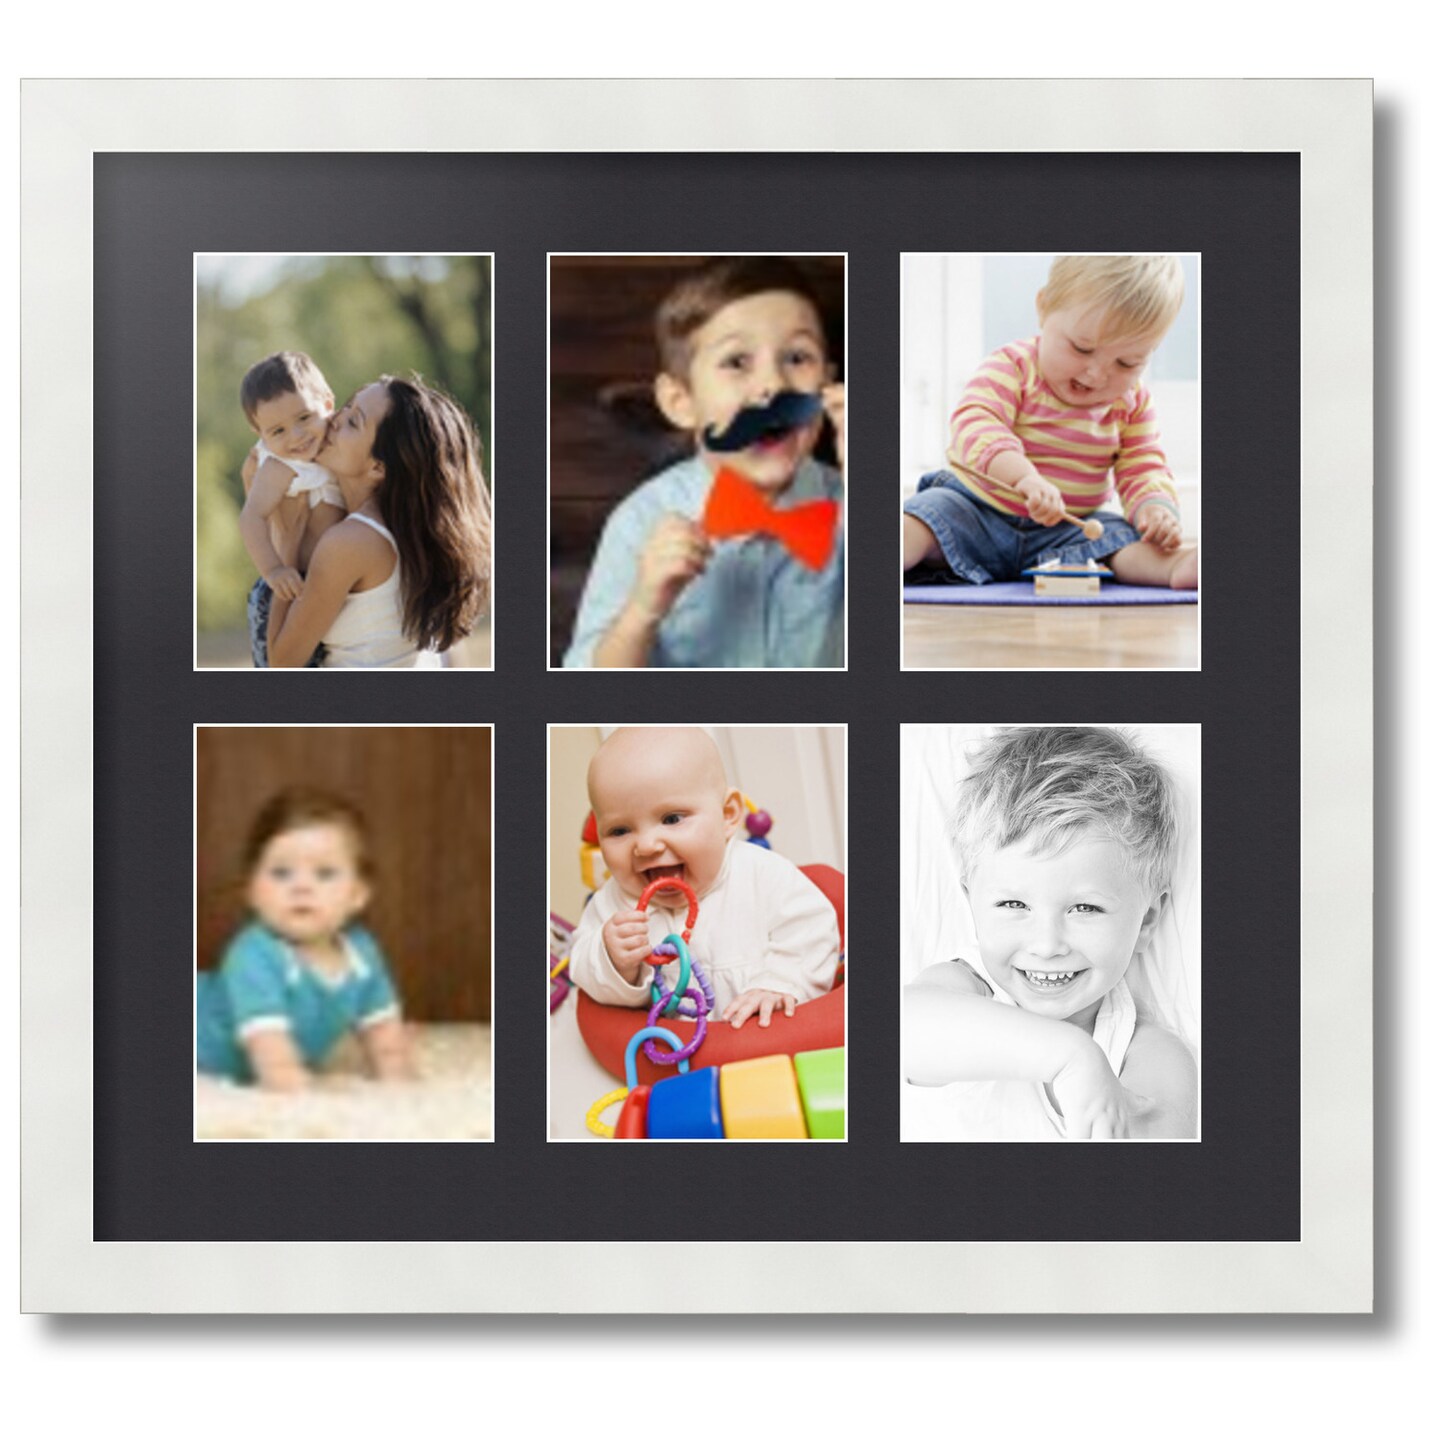 ArtToFrames Collage Photo Picture Frame with 6 - 5x7 inch Openings, Framed in White with Over 62 Mat Color Options and Plexi Glass (CSM-3966-2041)